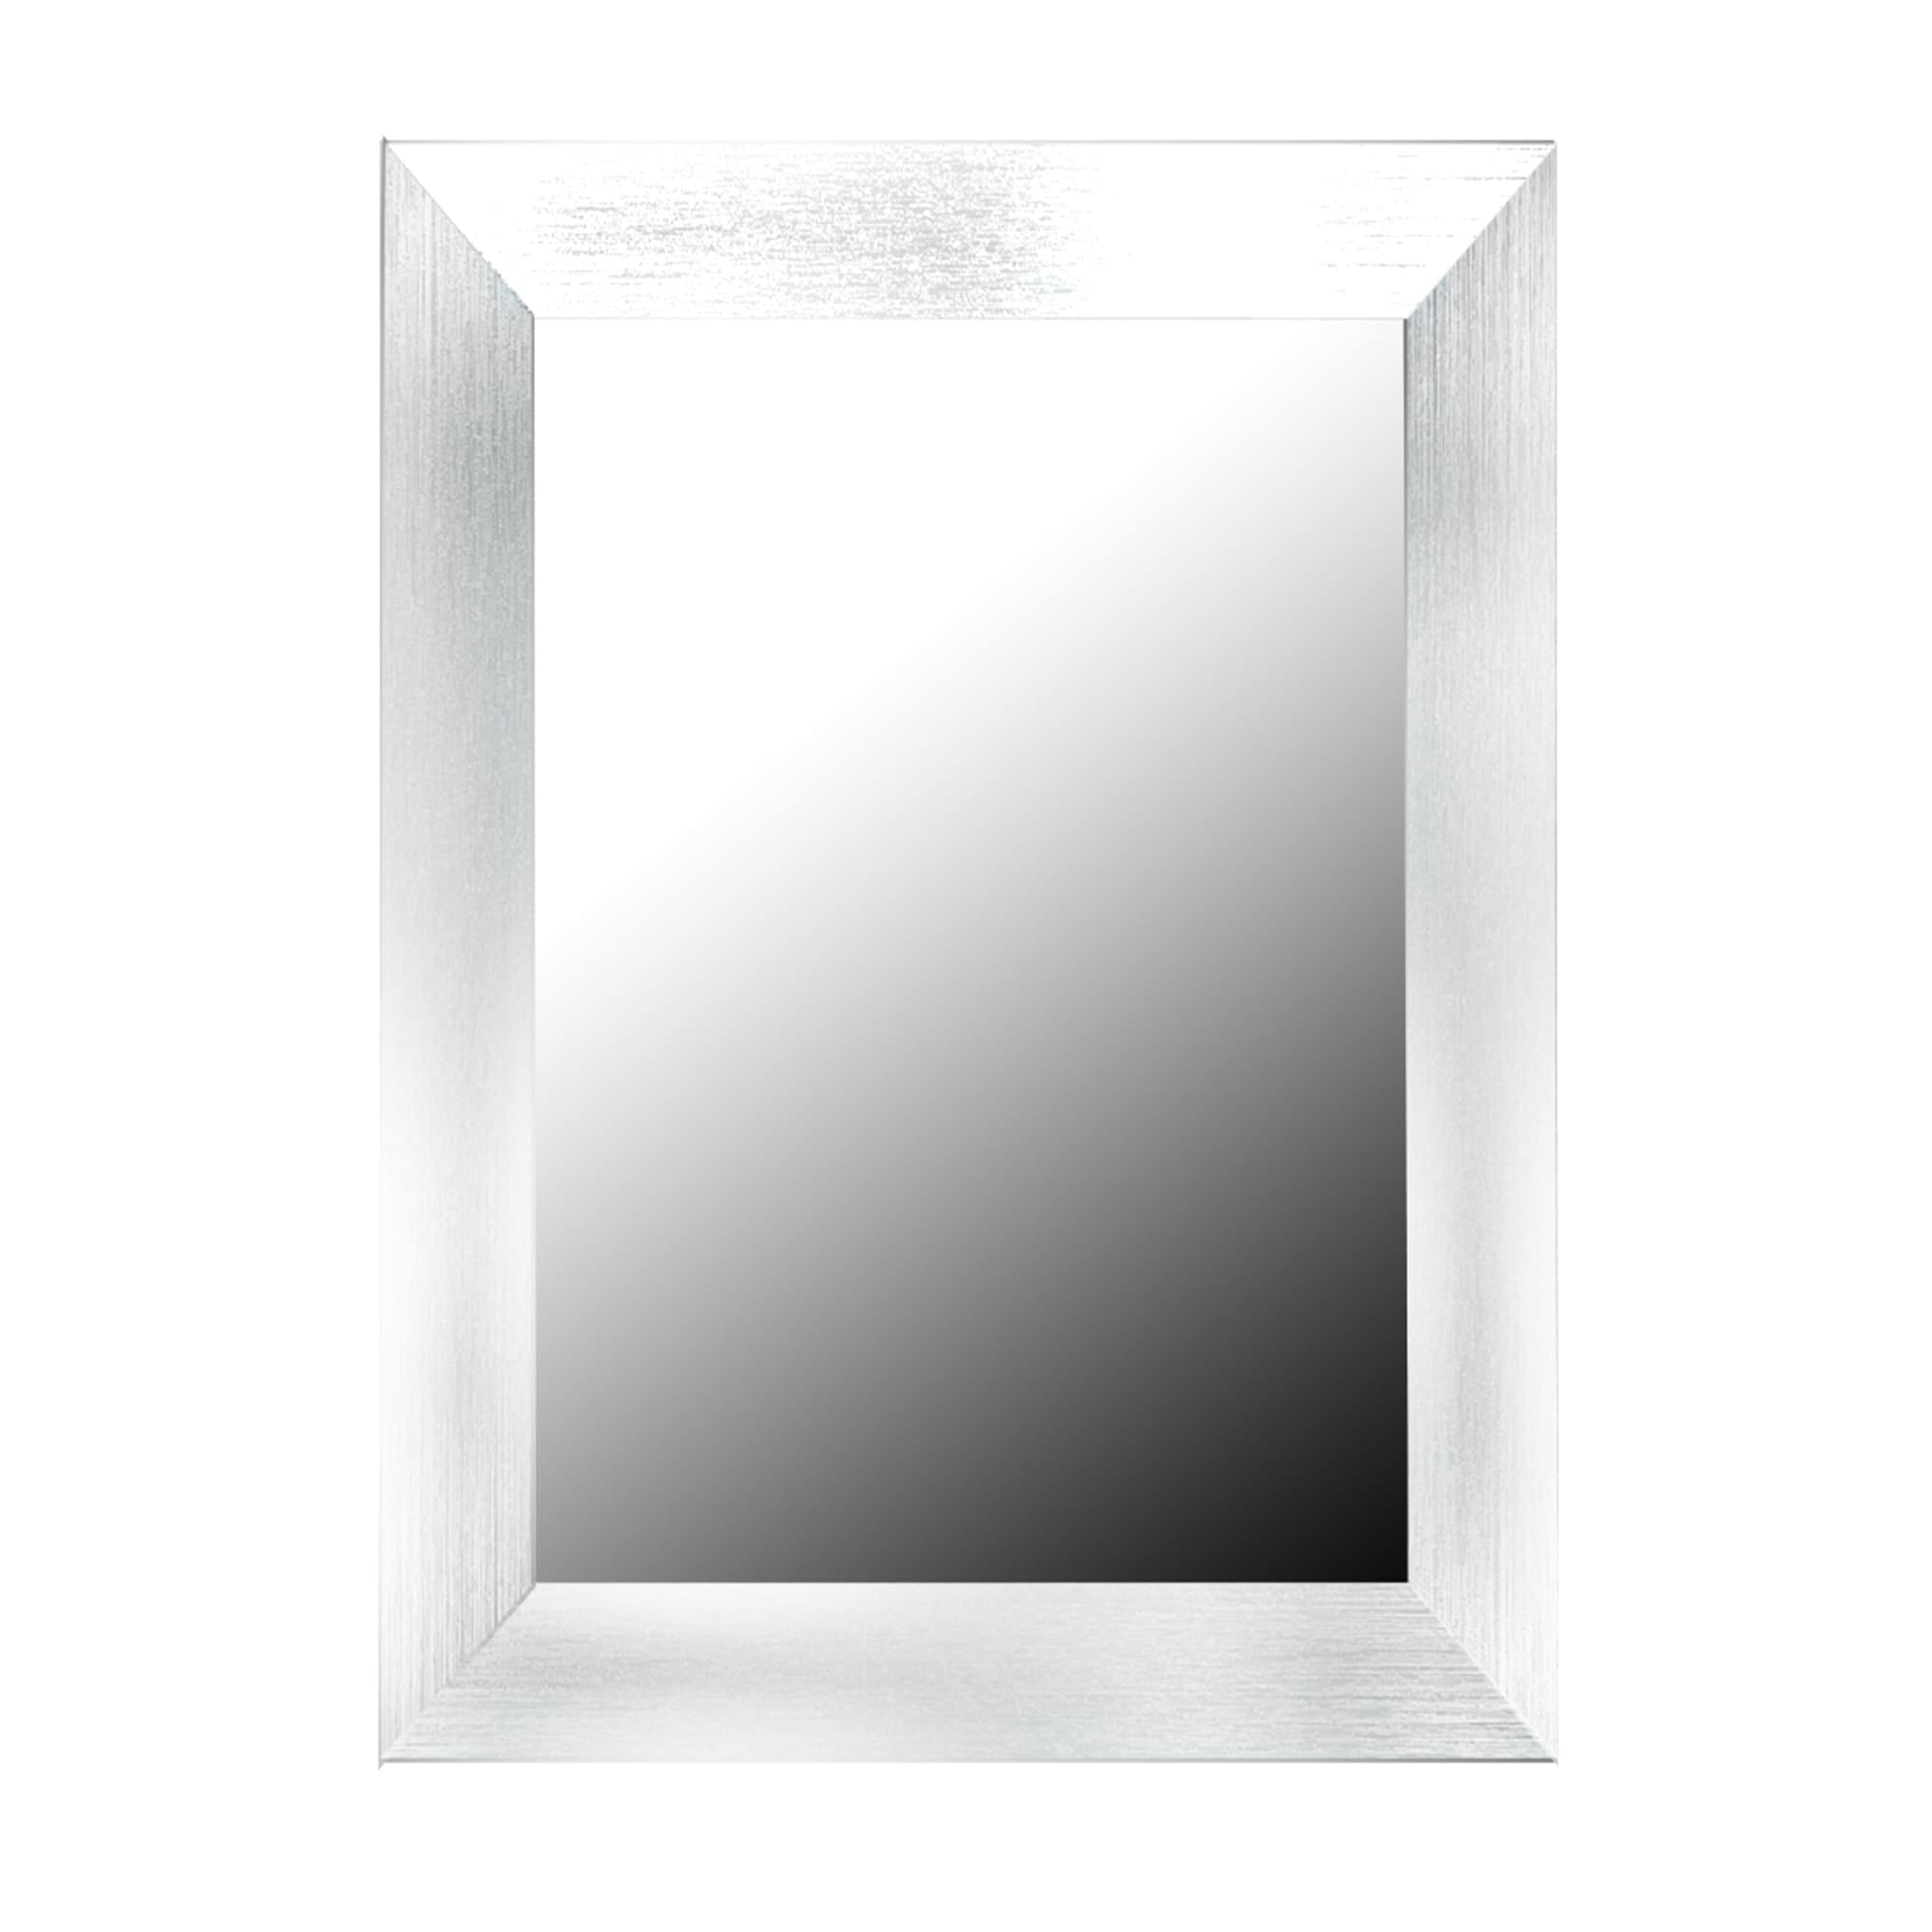 Home Basics Contemporary Rectangle Wall Mirror, Silver $5.00 EACH, CASE PACK OF 6